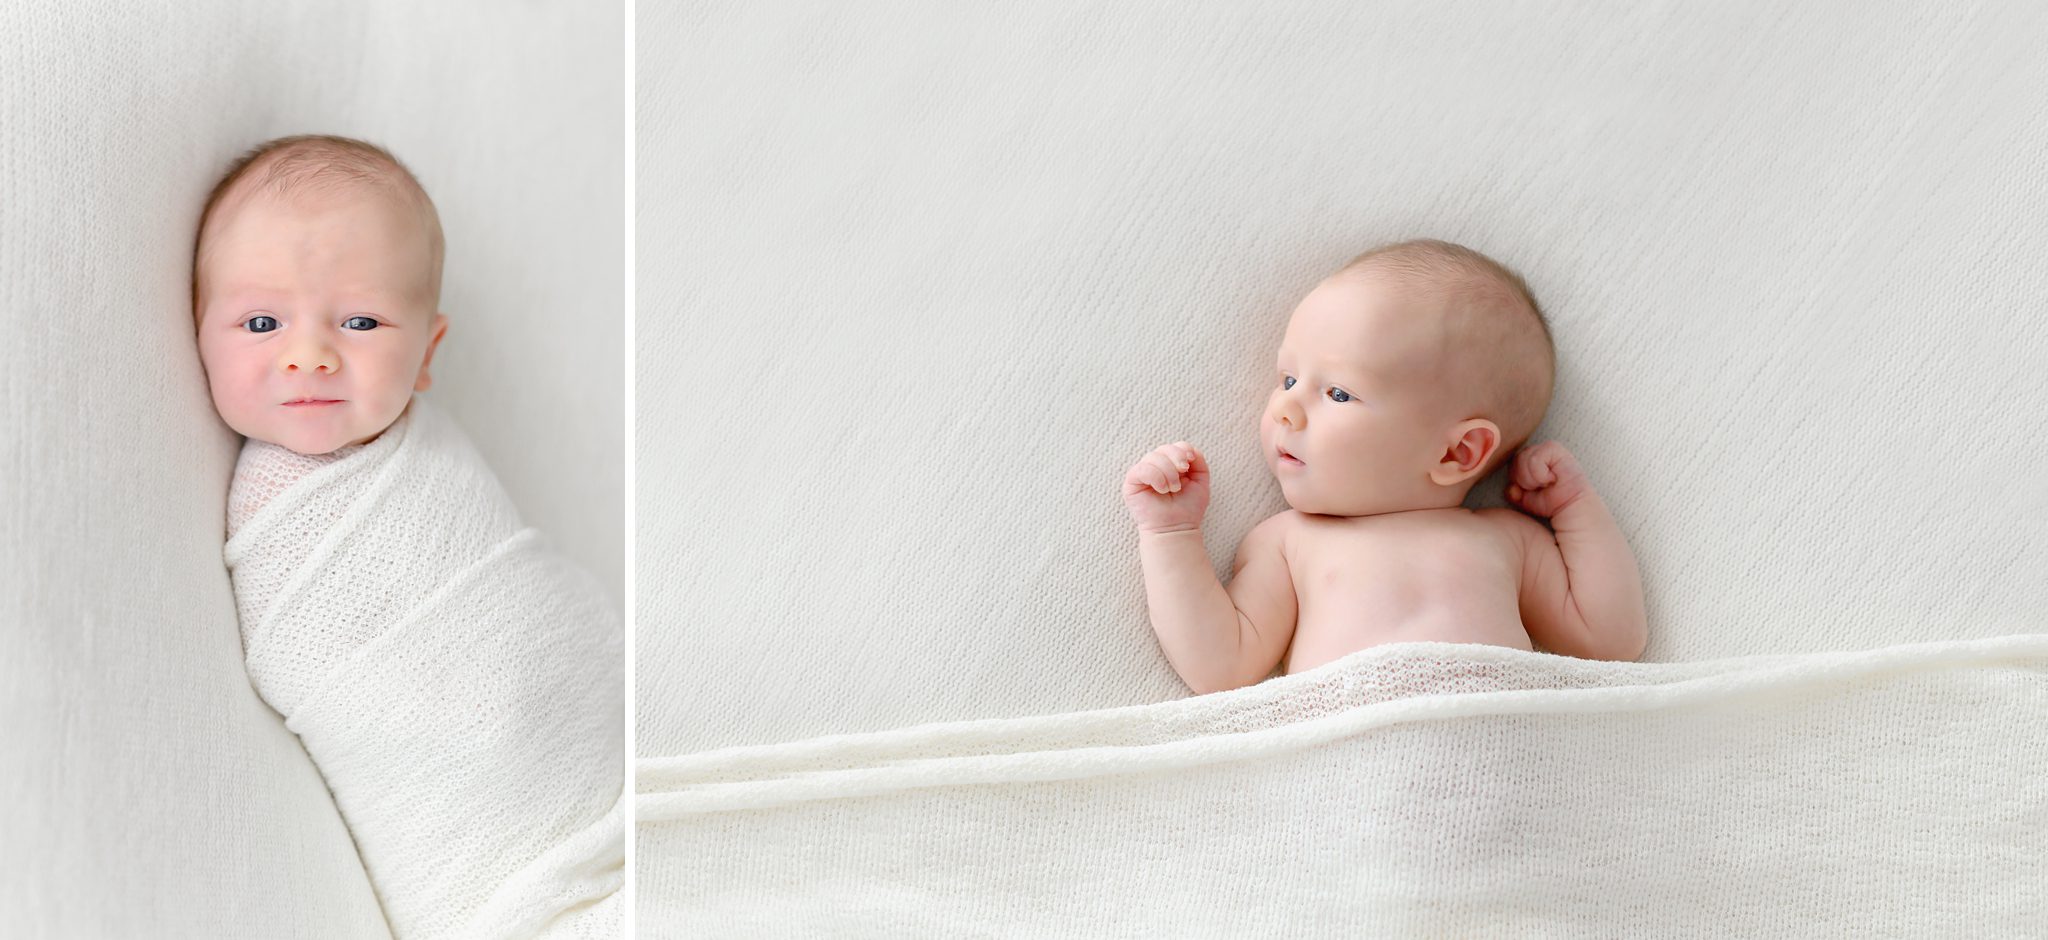 Family of five welcomes their first boy into the family by getting newborn portraits done in a bright white studio in Tampa, Florida.